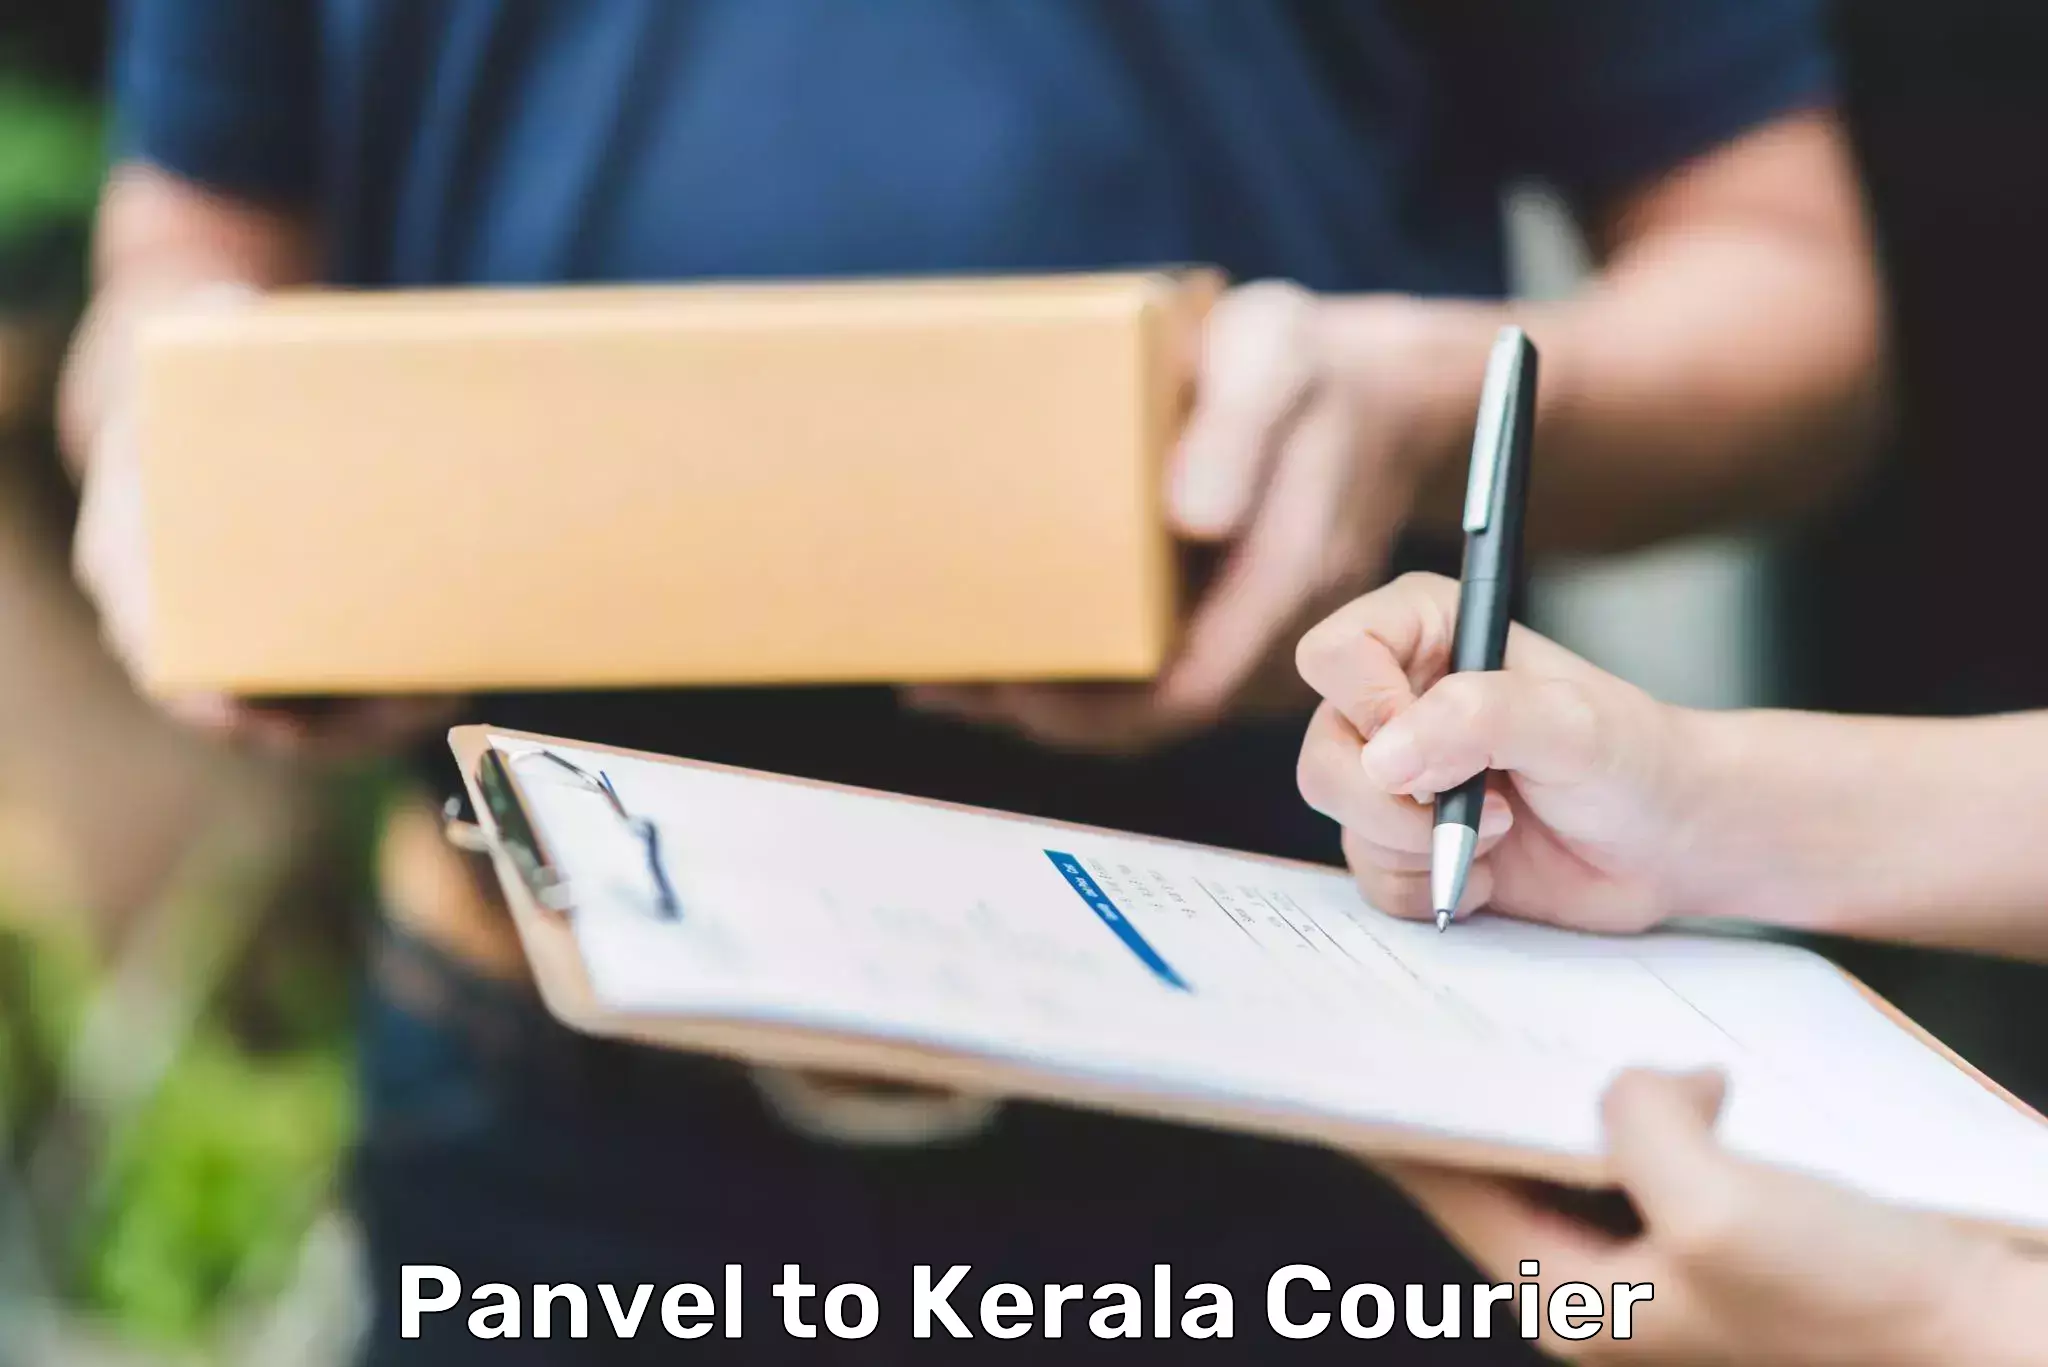 Fast delivery service Panvel to Kerala